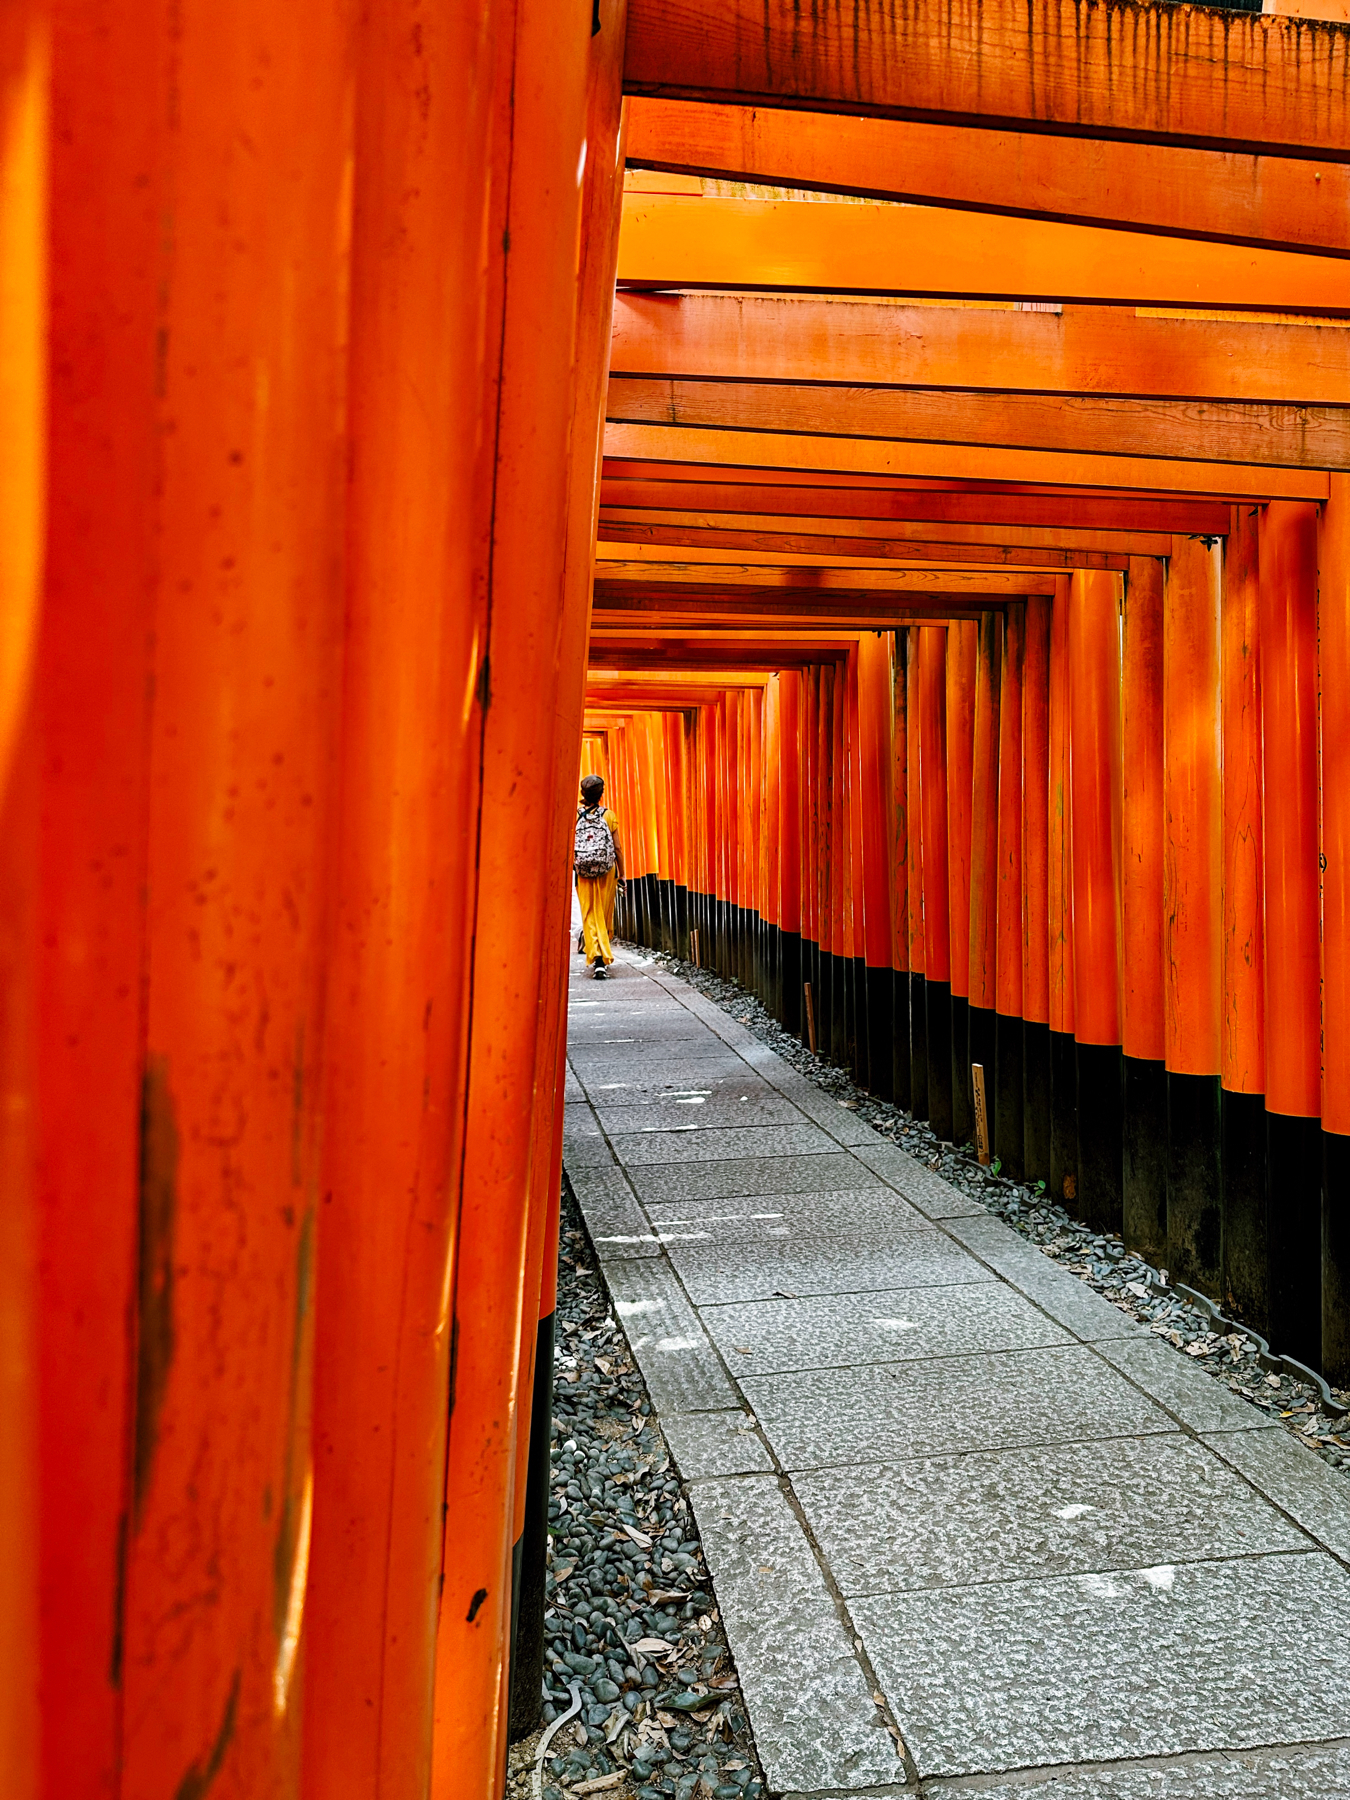 Pathway flanked by vibrant orange torii gates with a person in the background at Fushimi Inari Shrine in Kyoto, Japan.